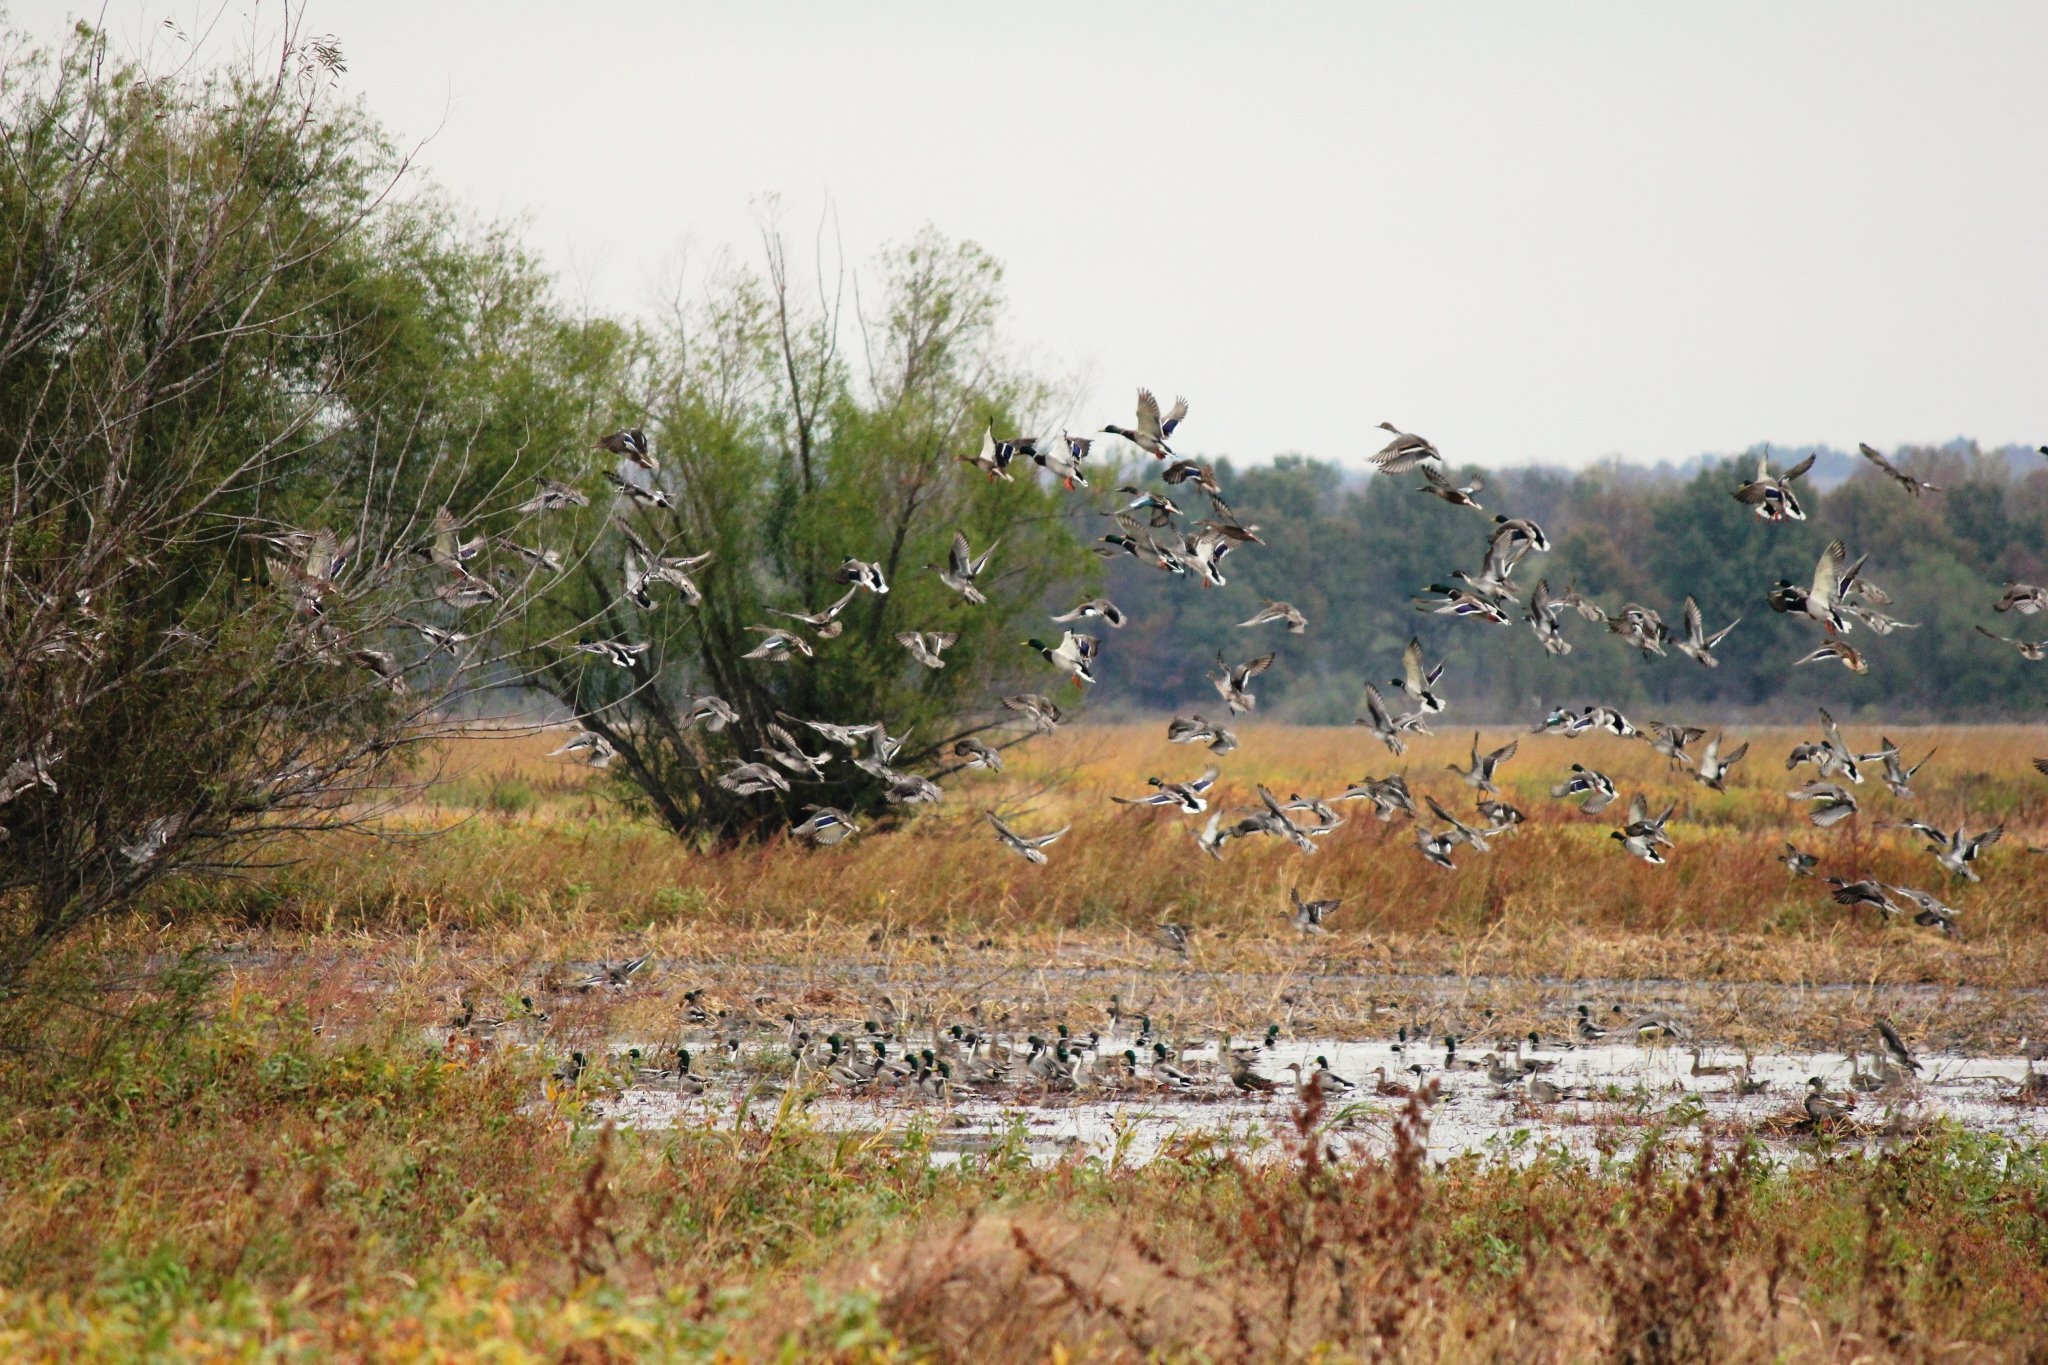 Ducks take off from NWR in Missouri.